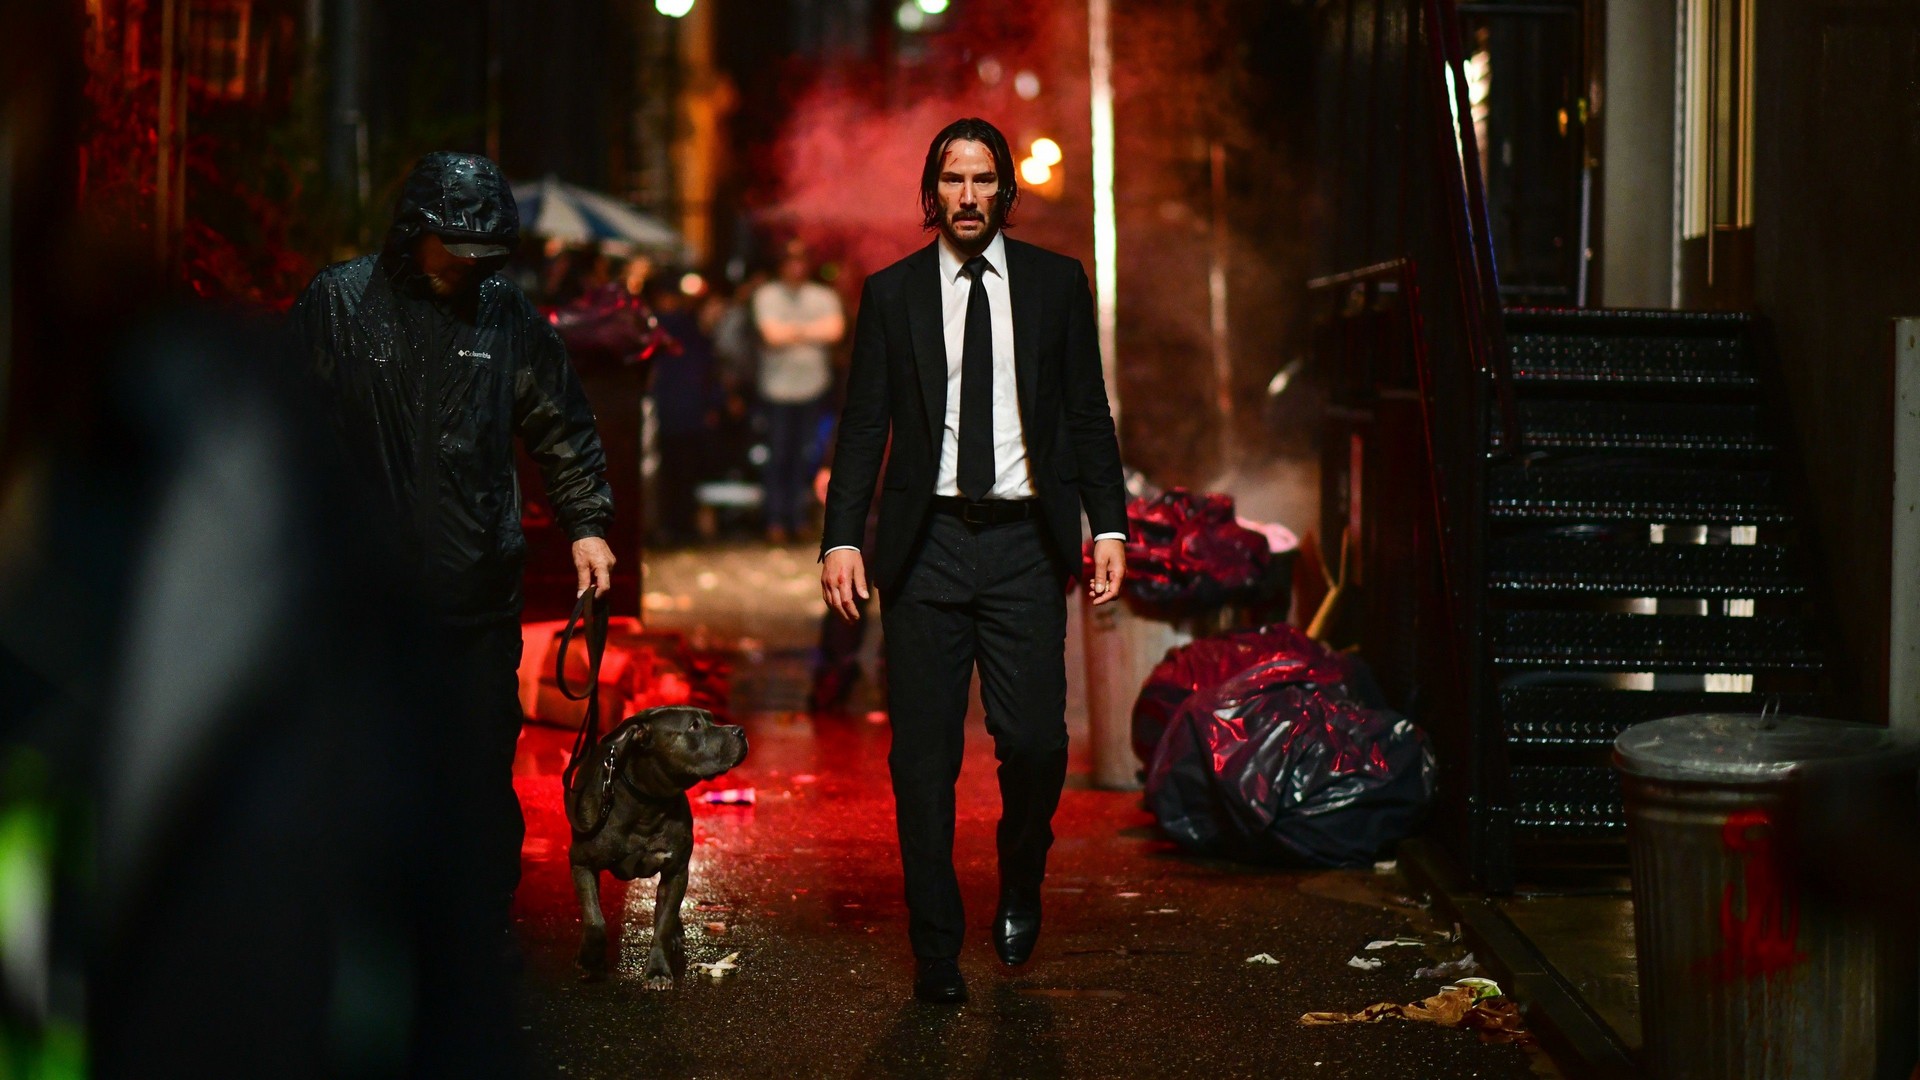 John Wick 3 2019 Wallpaper HD with high-resolution 1920x1080 pixel. You can use this poster wallpaper for your Desktop Computers, Mac Screensavers, Windows Backgrounds, iPhone Wallpapers, Tablet or Android Lock screen and another Mobile device